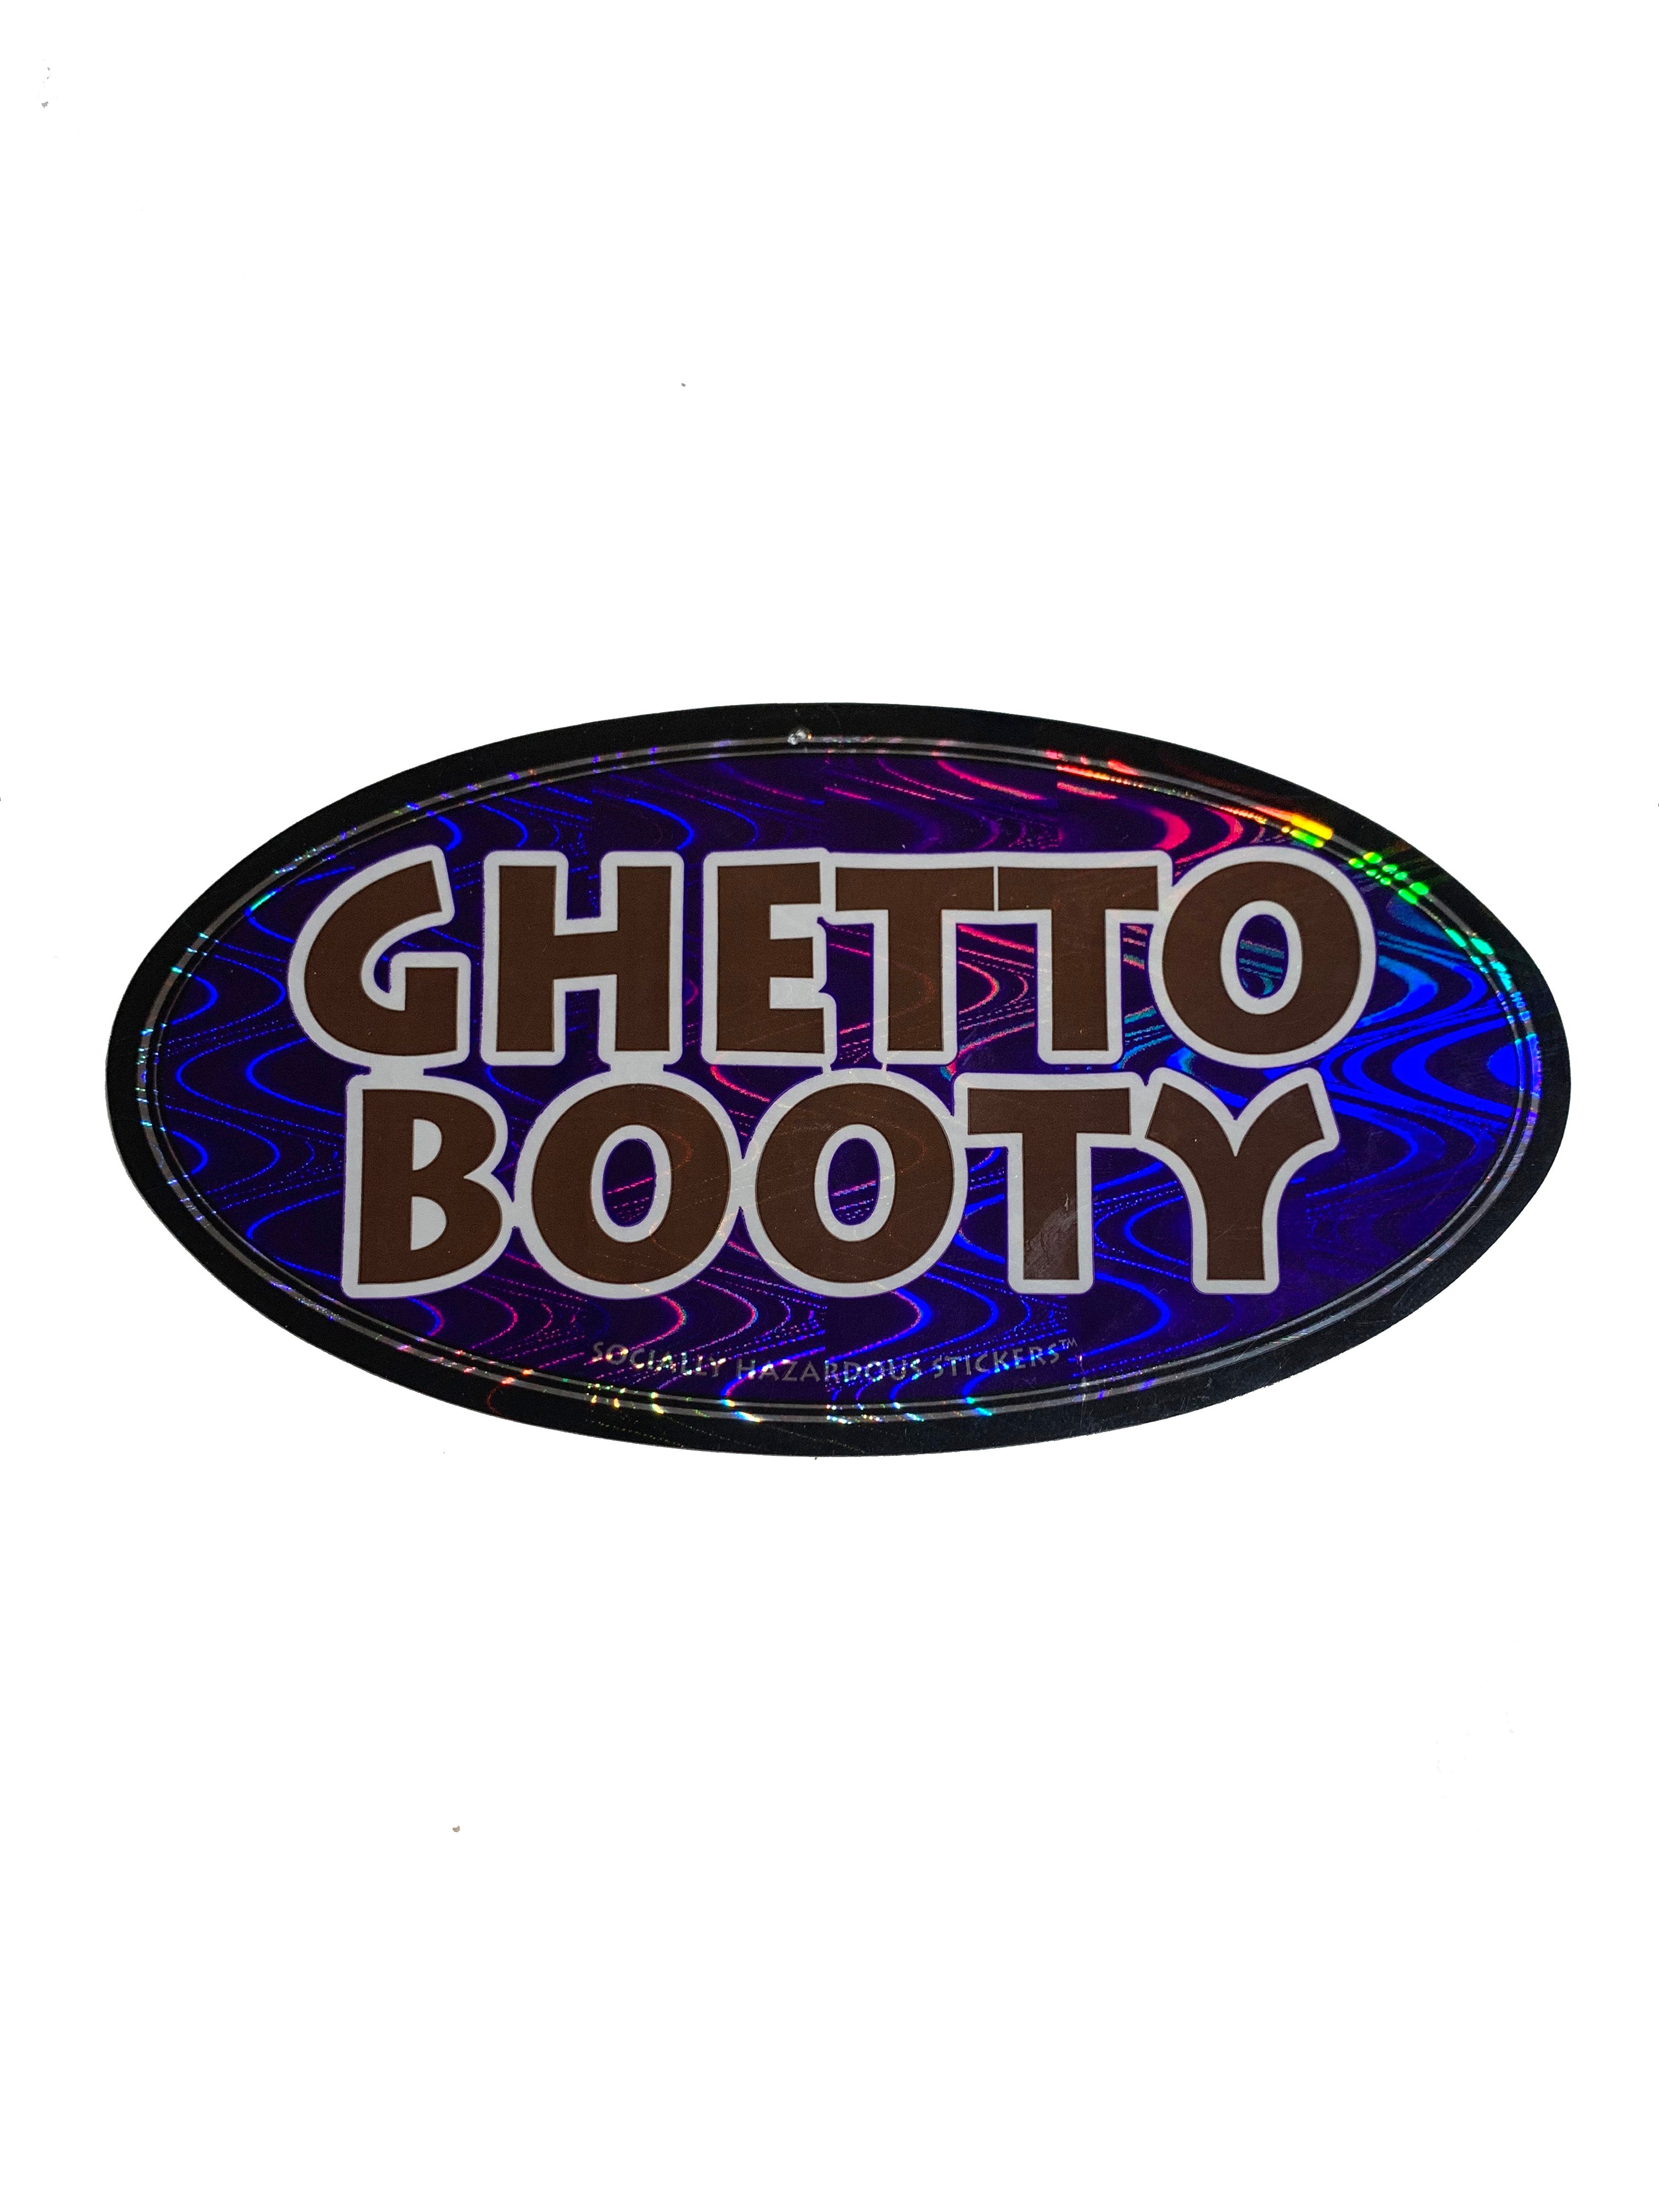 Ghetto booty images